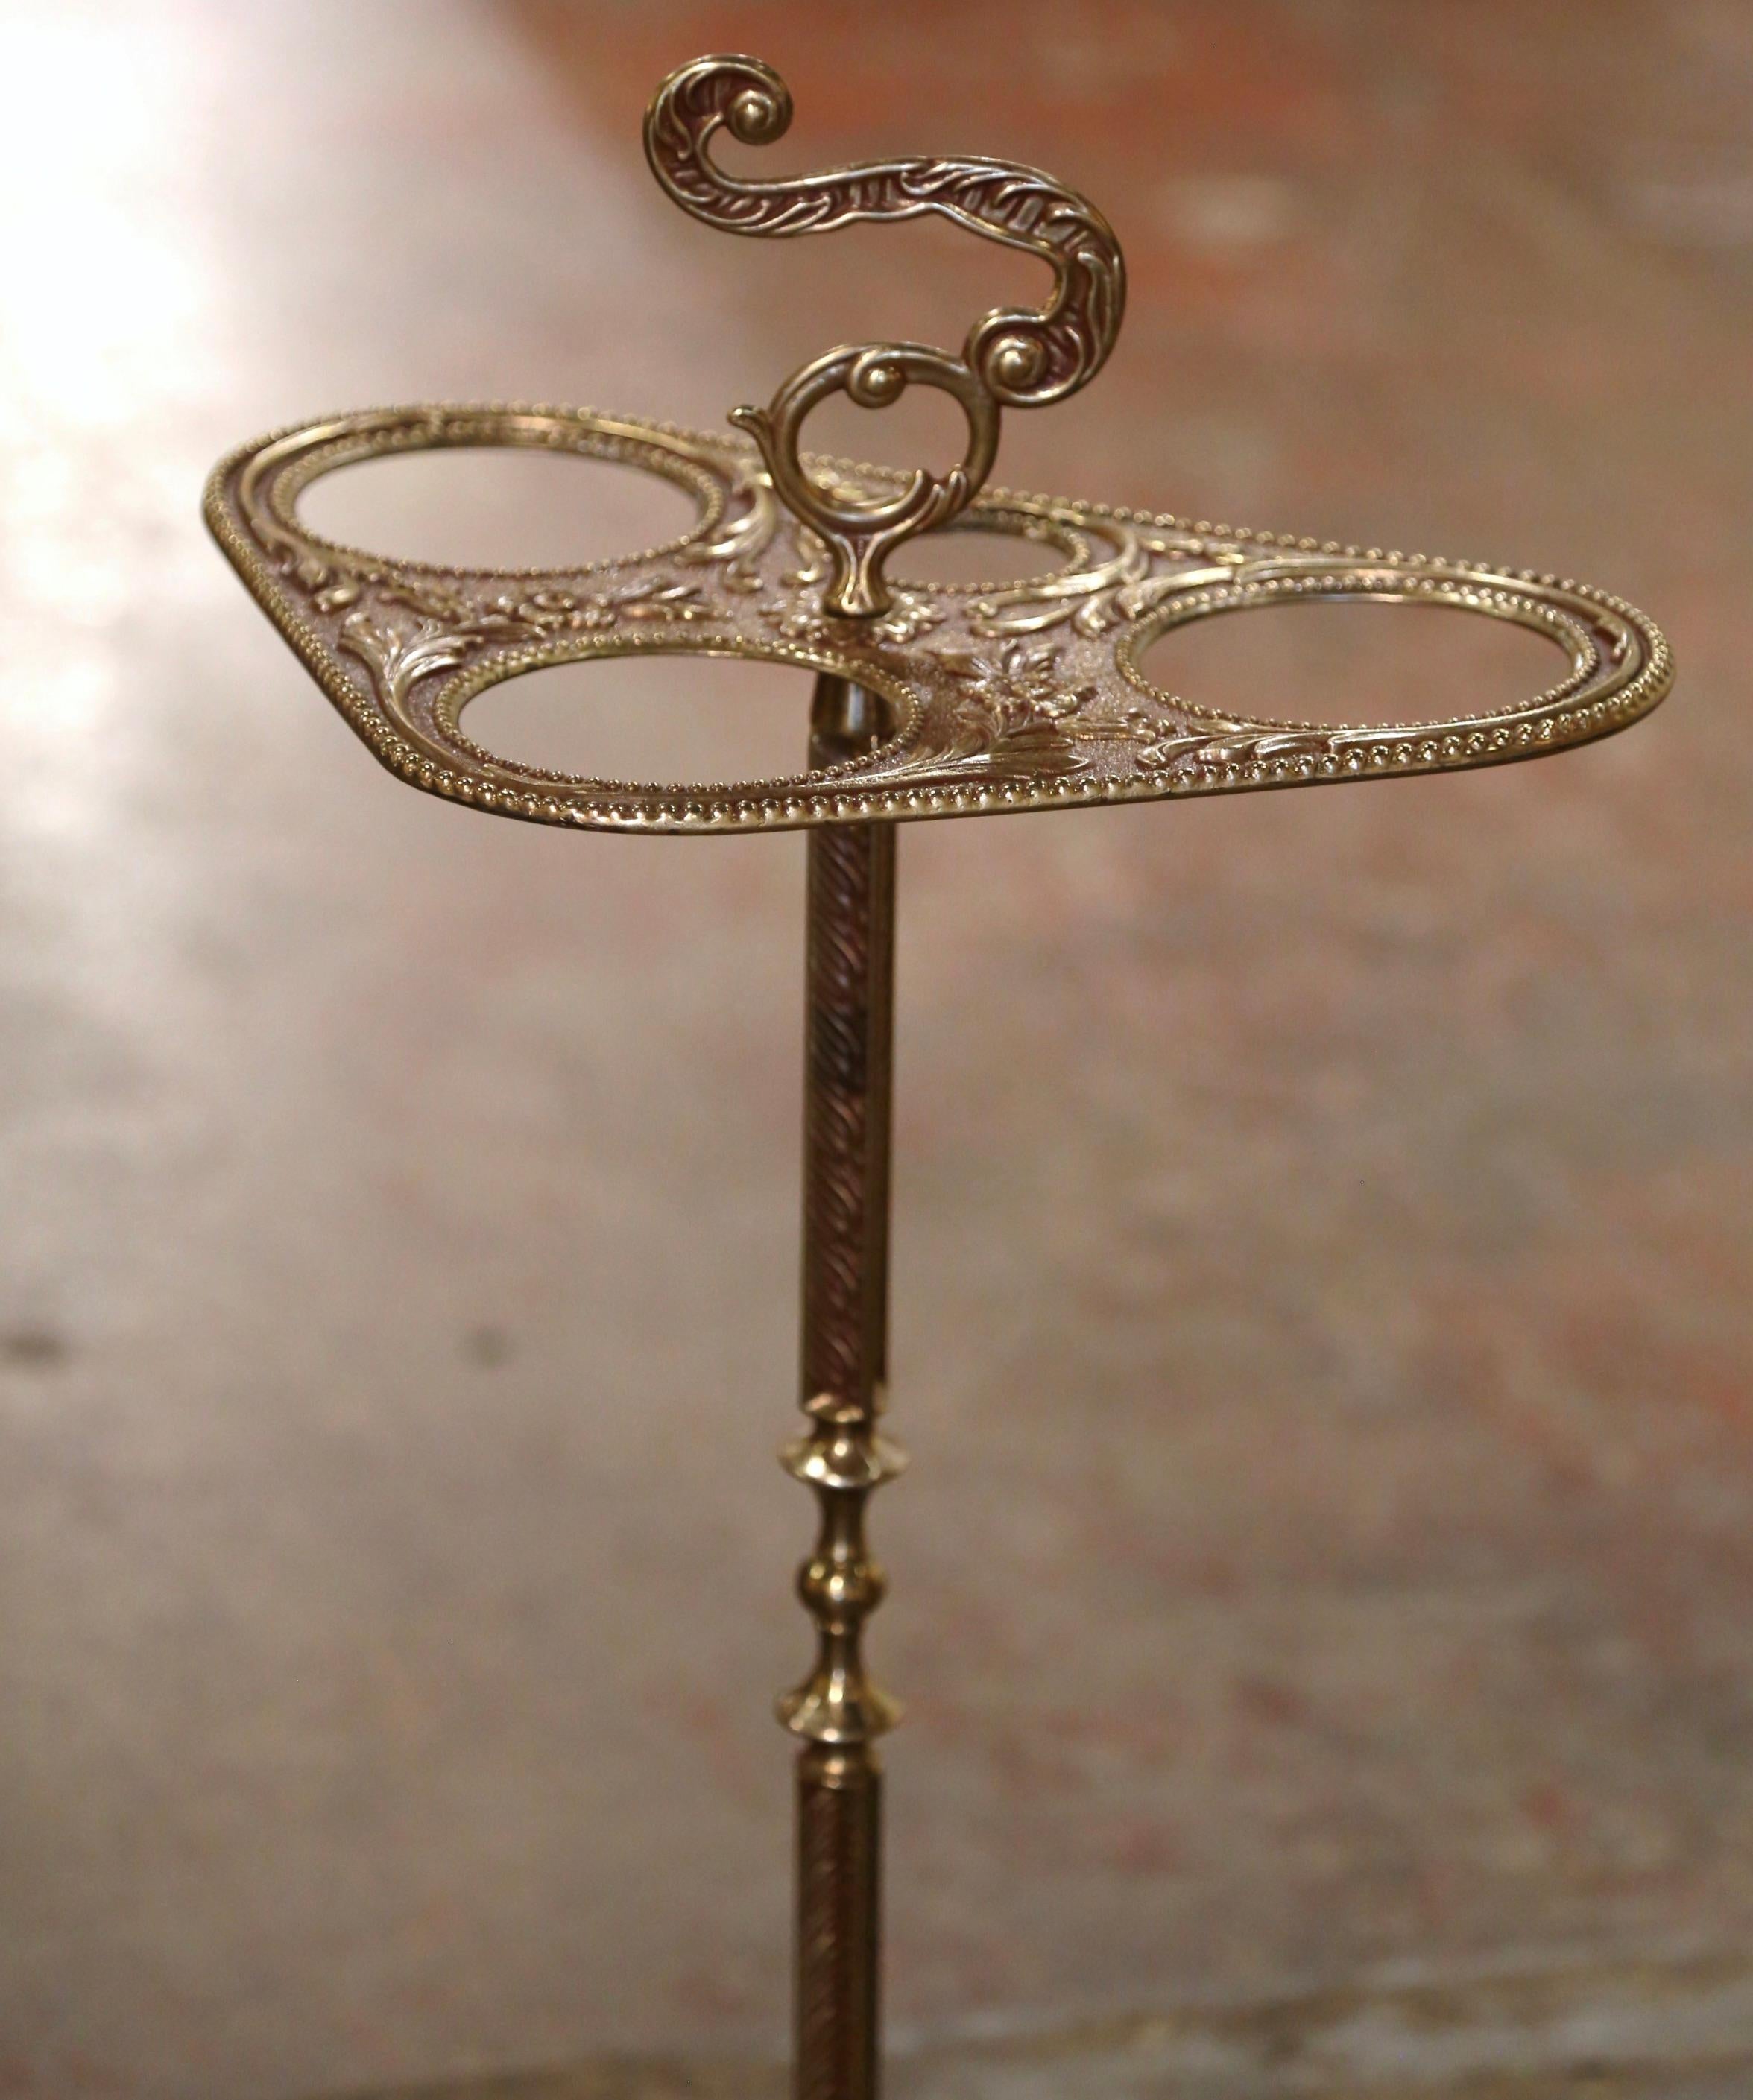 Repoussé Early 20th Century French Brass Umbrella Stand with Repousse Motifs